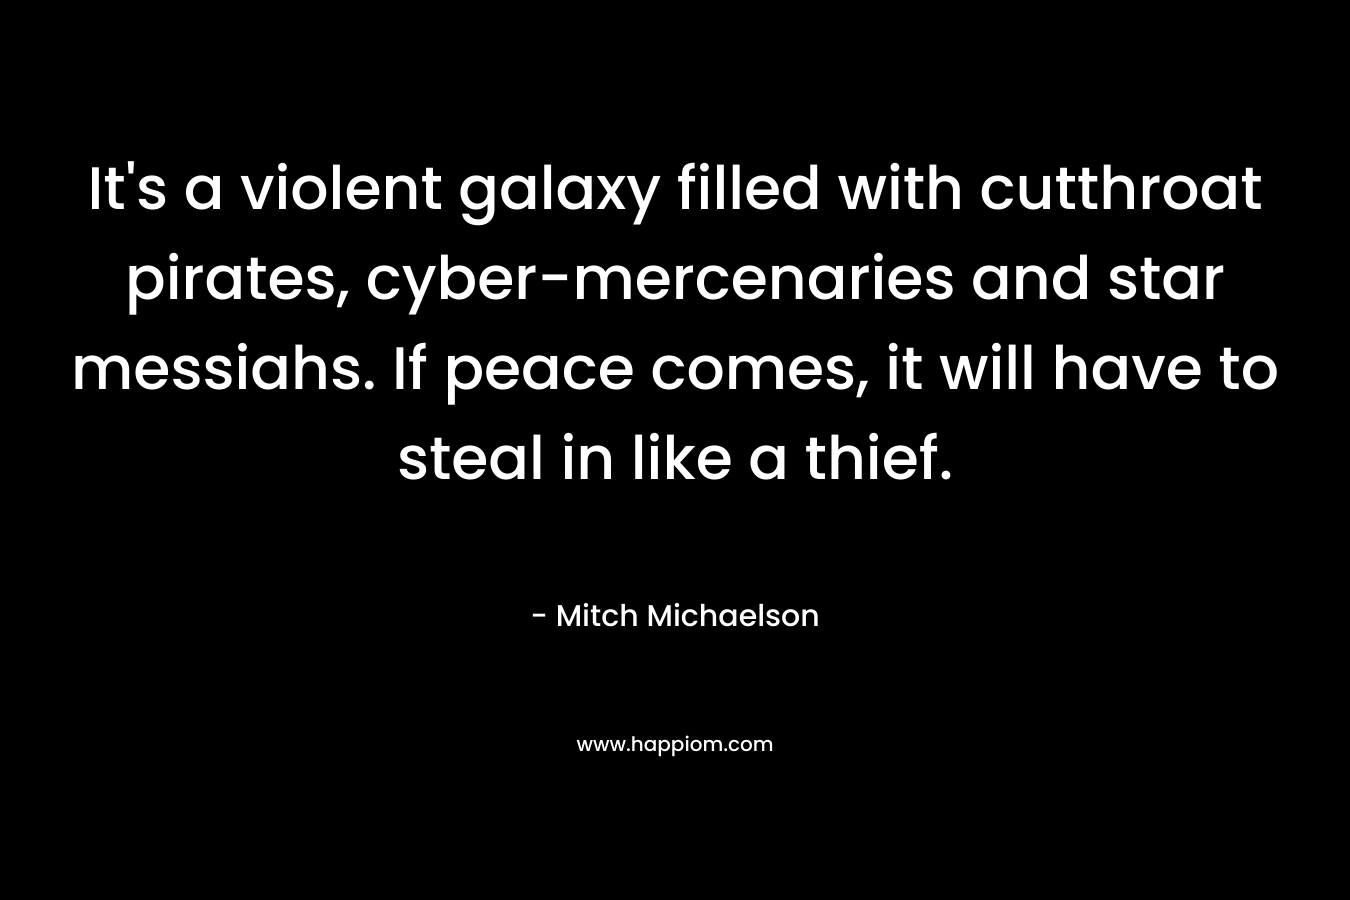 It's a violent galaxy filled with cutthroat pirates, cyber-mercenaries and star messiahs. If peace comes, it will have to steal in like a thief.